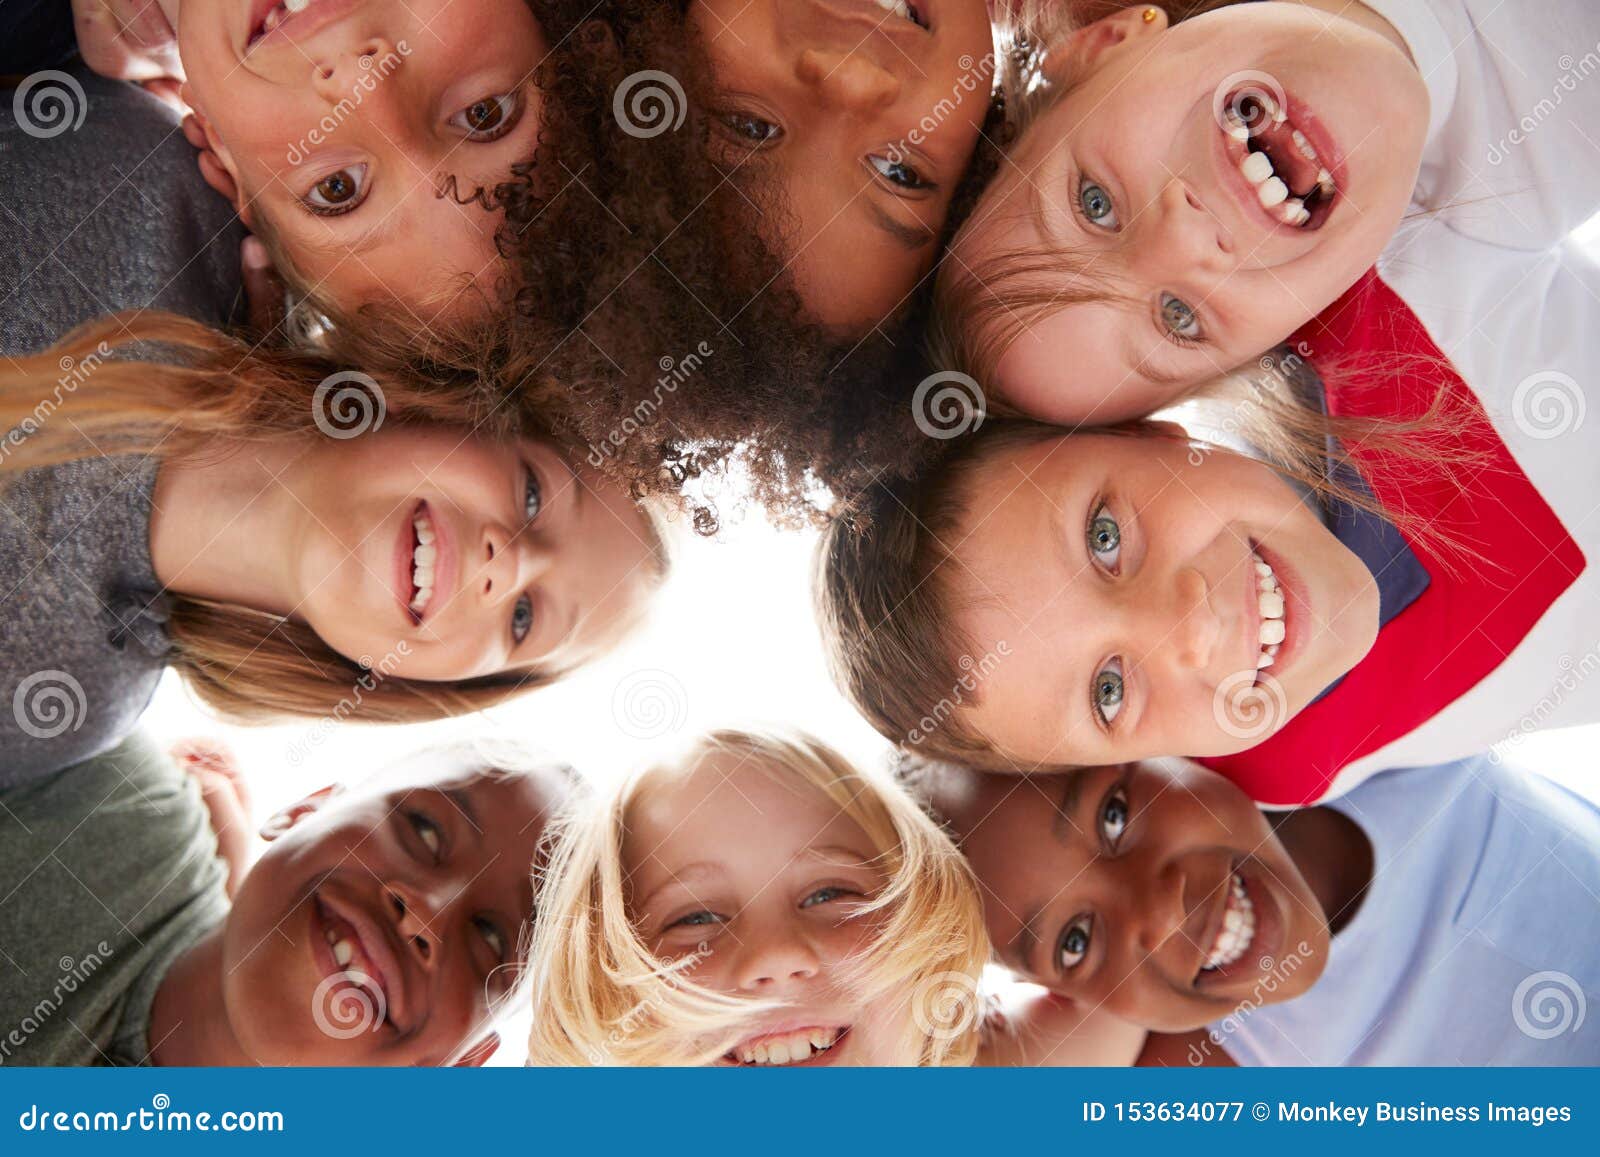 group of multi-cultural children with friends looking down into camera